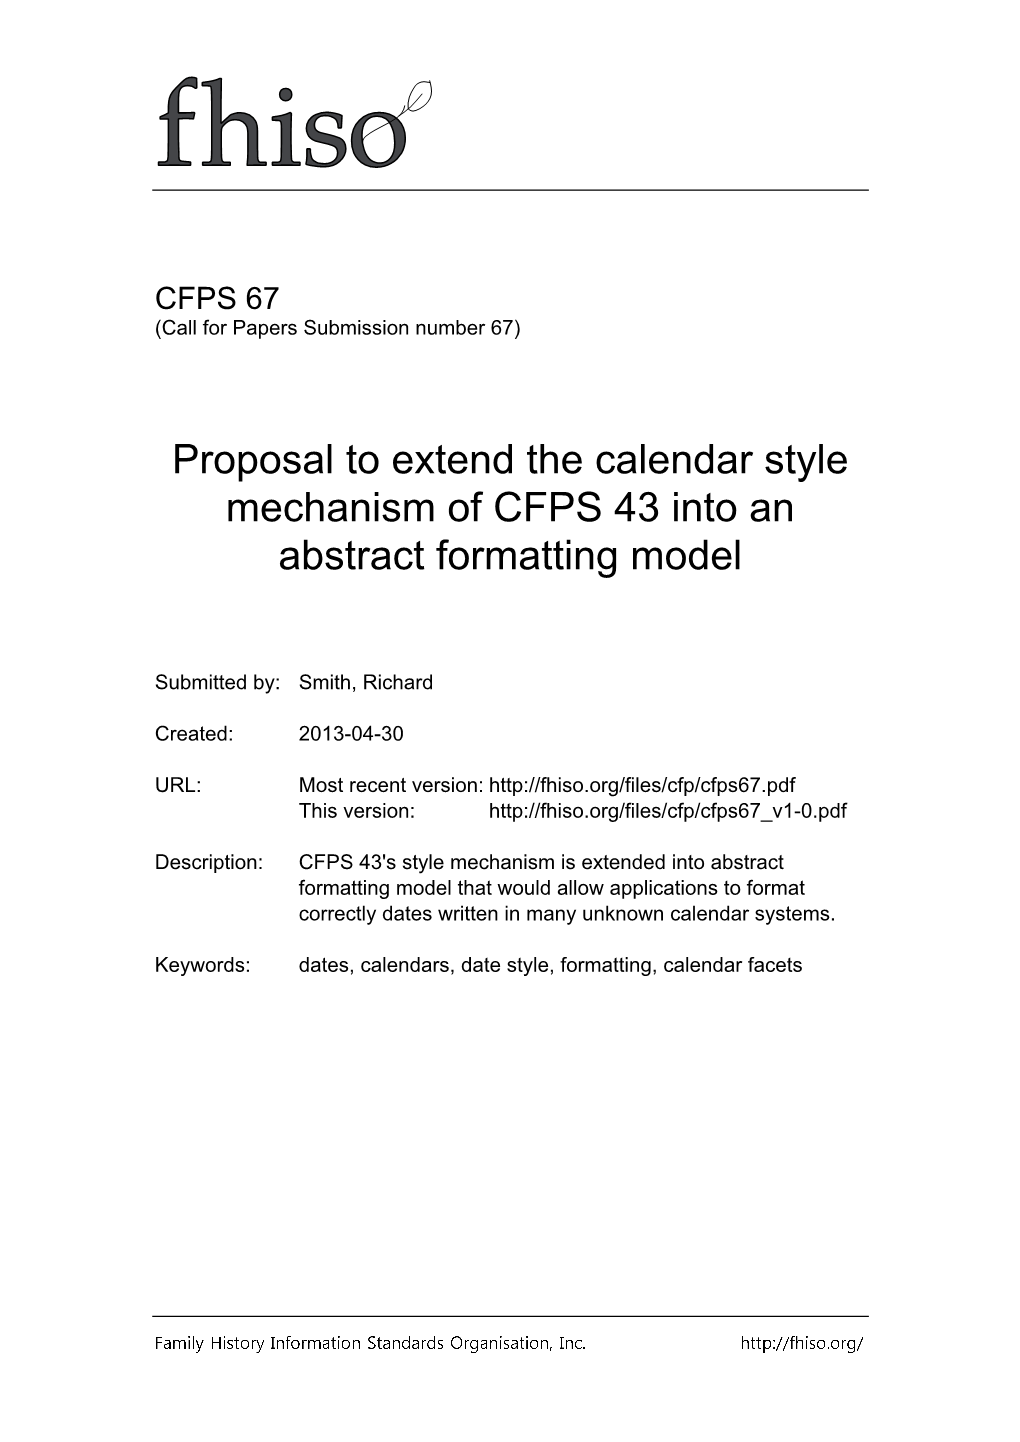 Proposal to Extend the Calendar Style Mechanism of CFPS 43 Into an Abstract Formatting Model